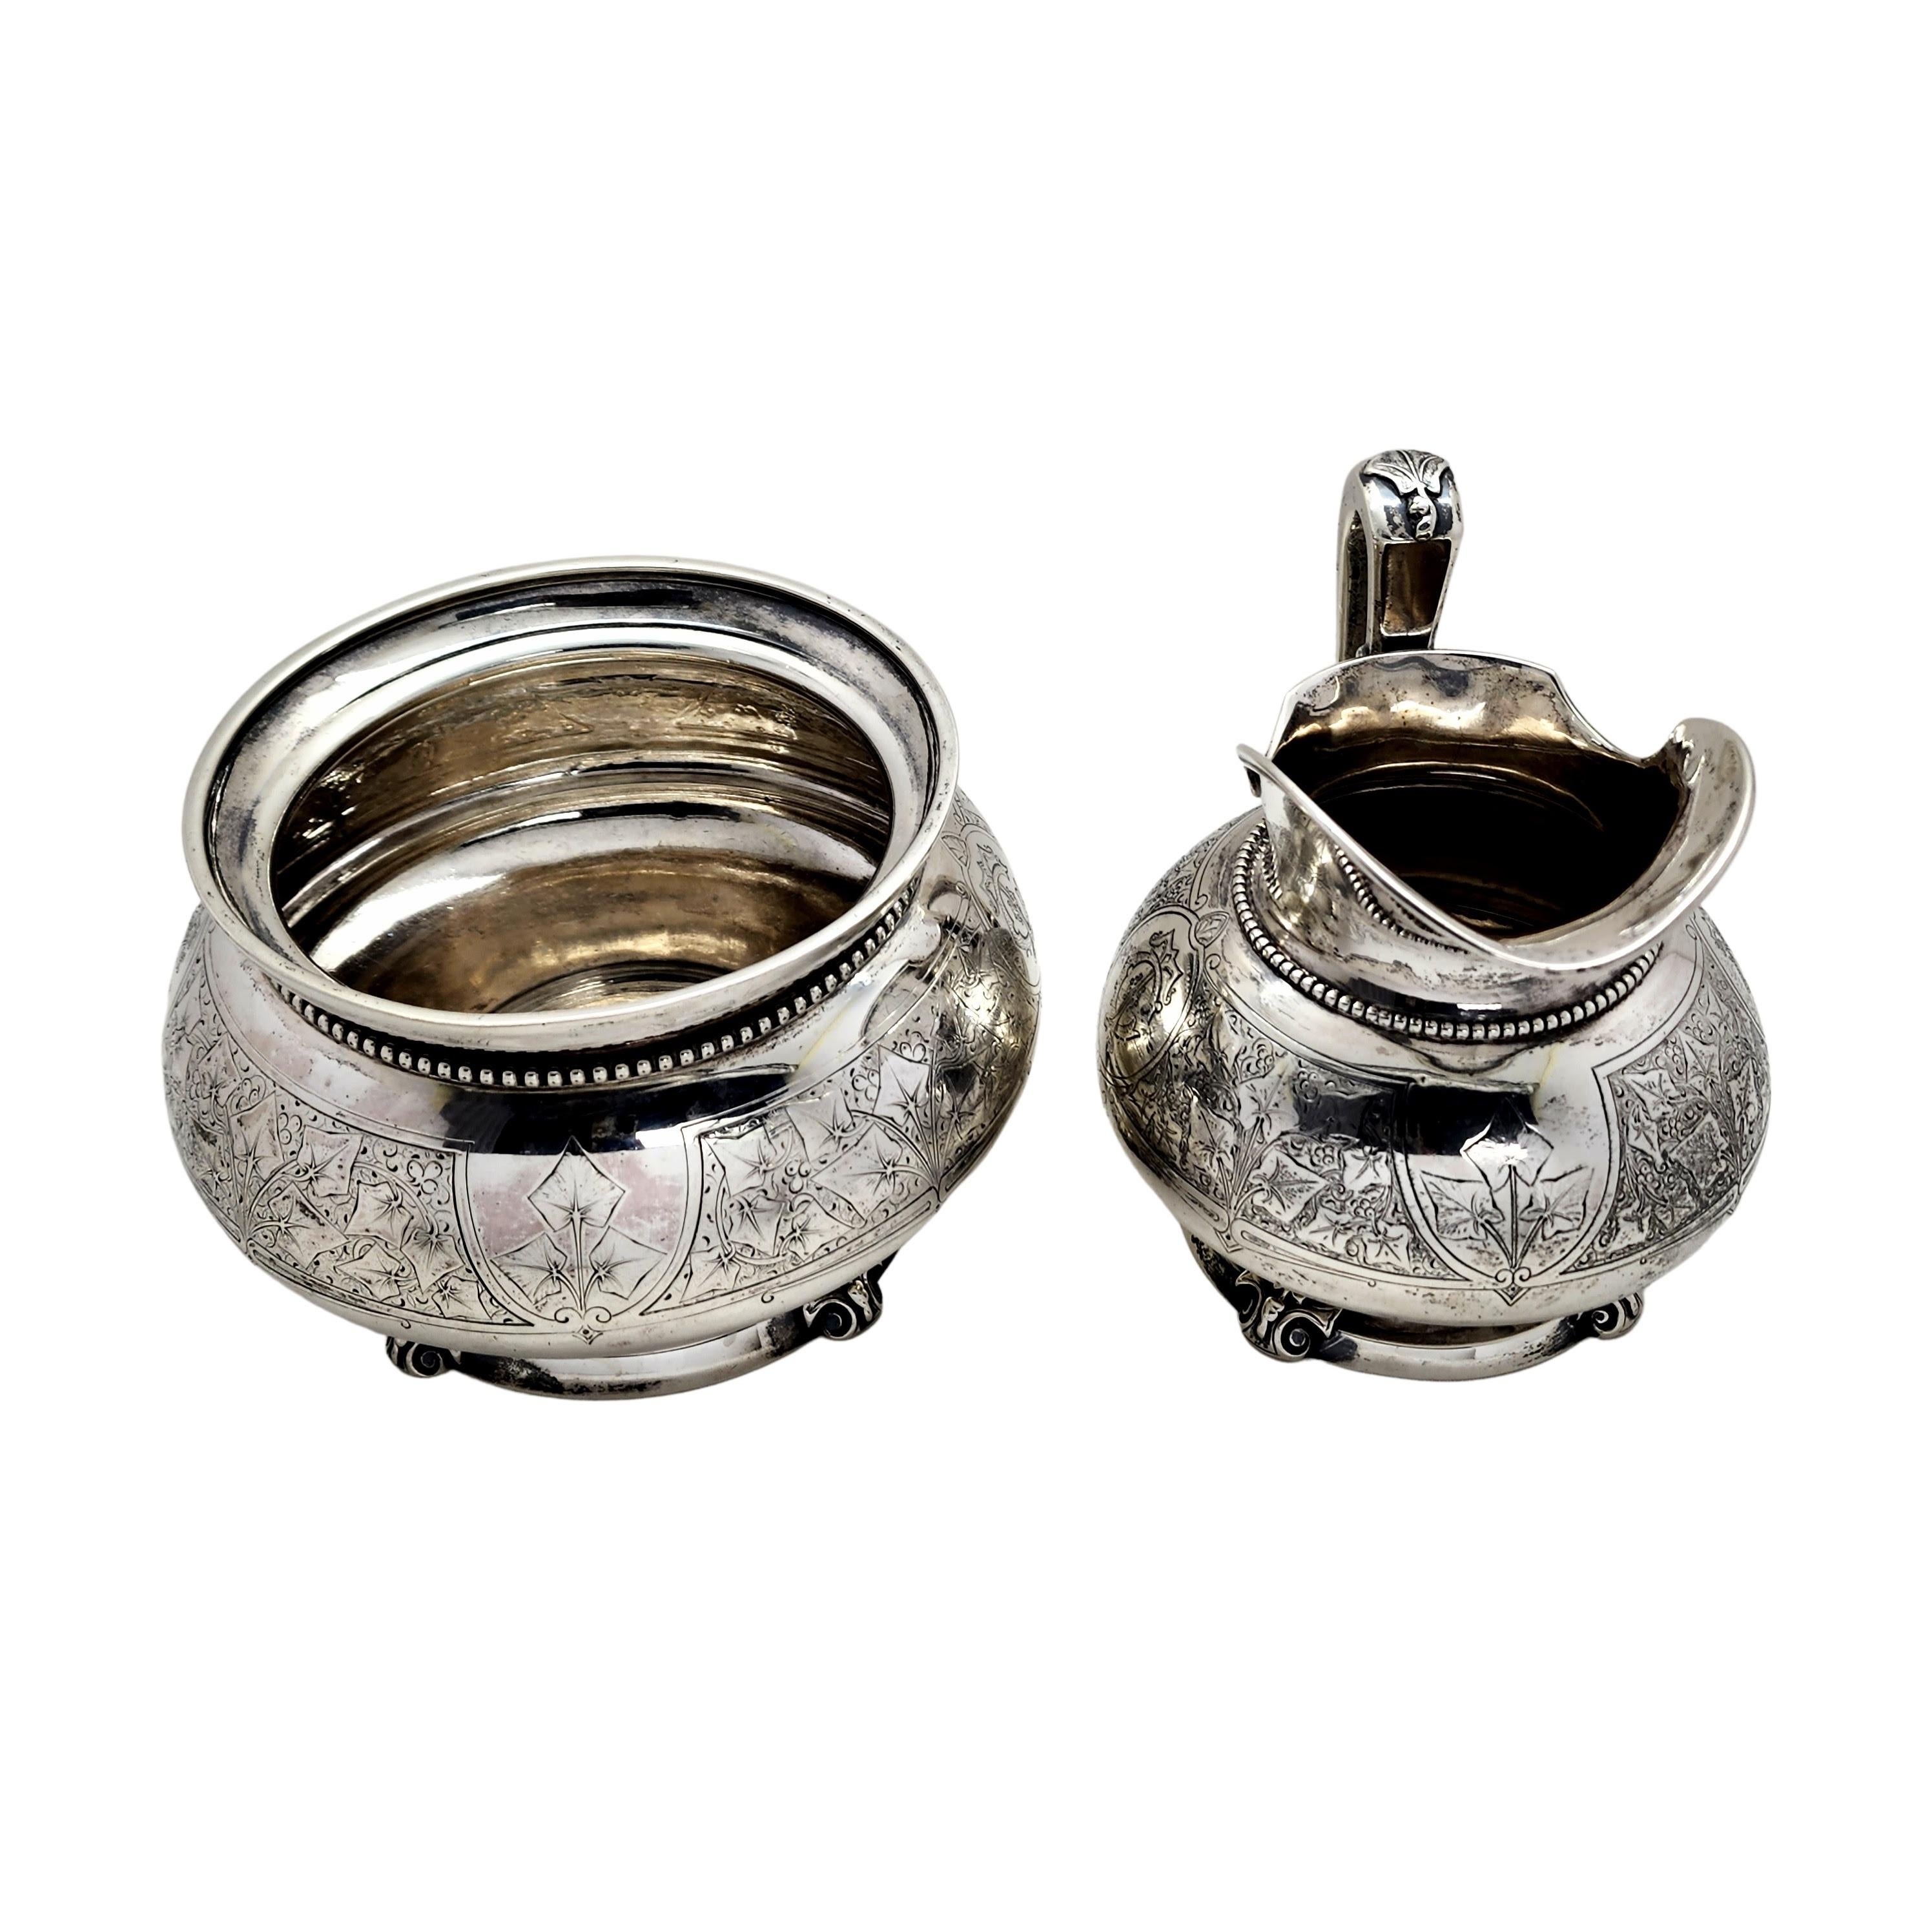 Antique sterling silver waste bowl and creamer in the Antique Ivy pattern by Tiffany & Co with monogram.

Monogram appears to be the intertwined letters TCM

Beautifully ornate ivy leaves surround both of these pieces and adorn the creamer's handle,